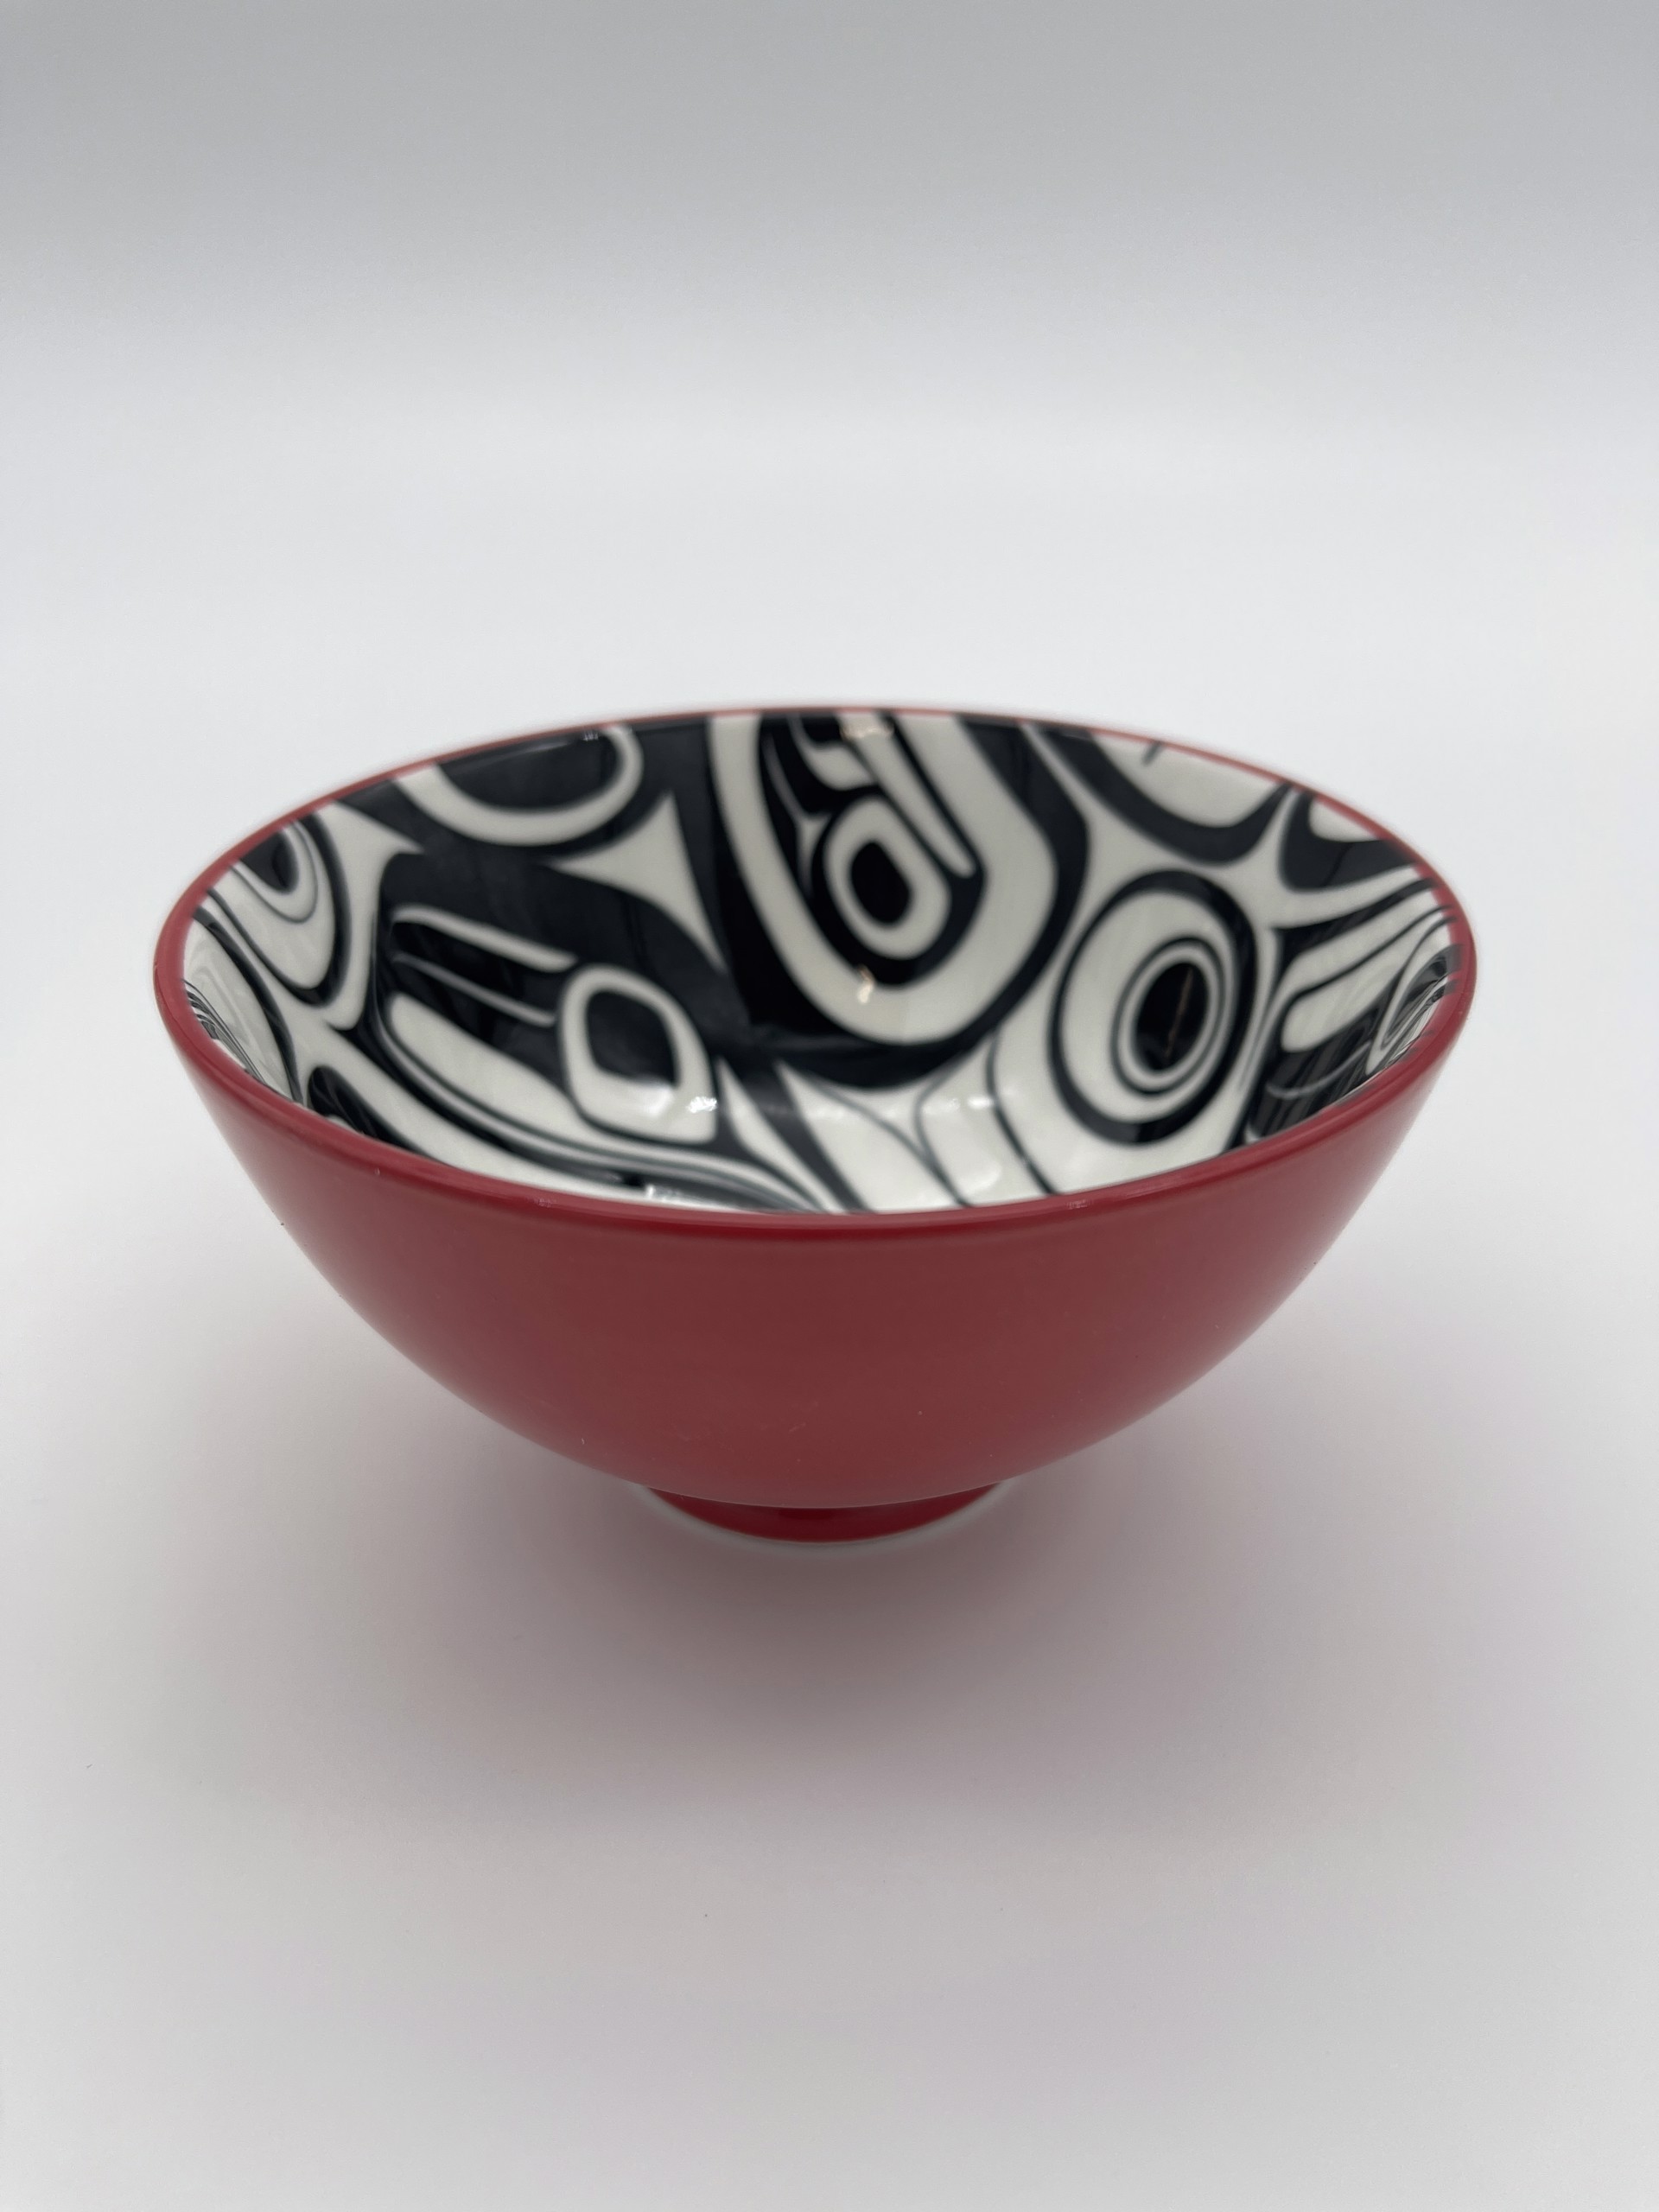 Raven Small Bowl Red/Black by Kelly Robinson